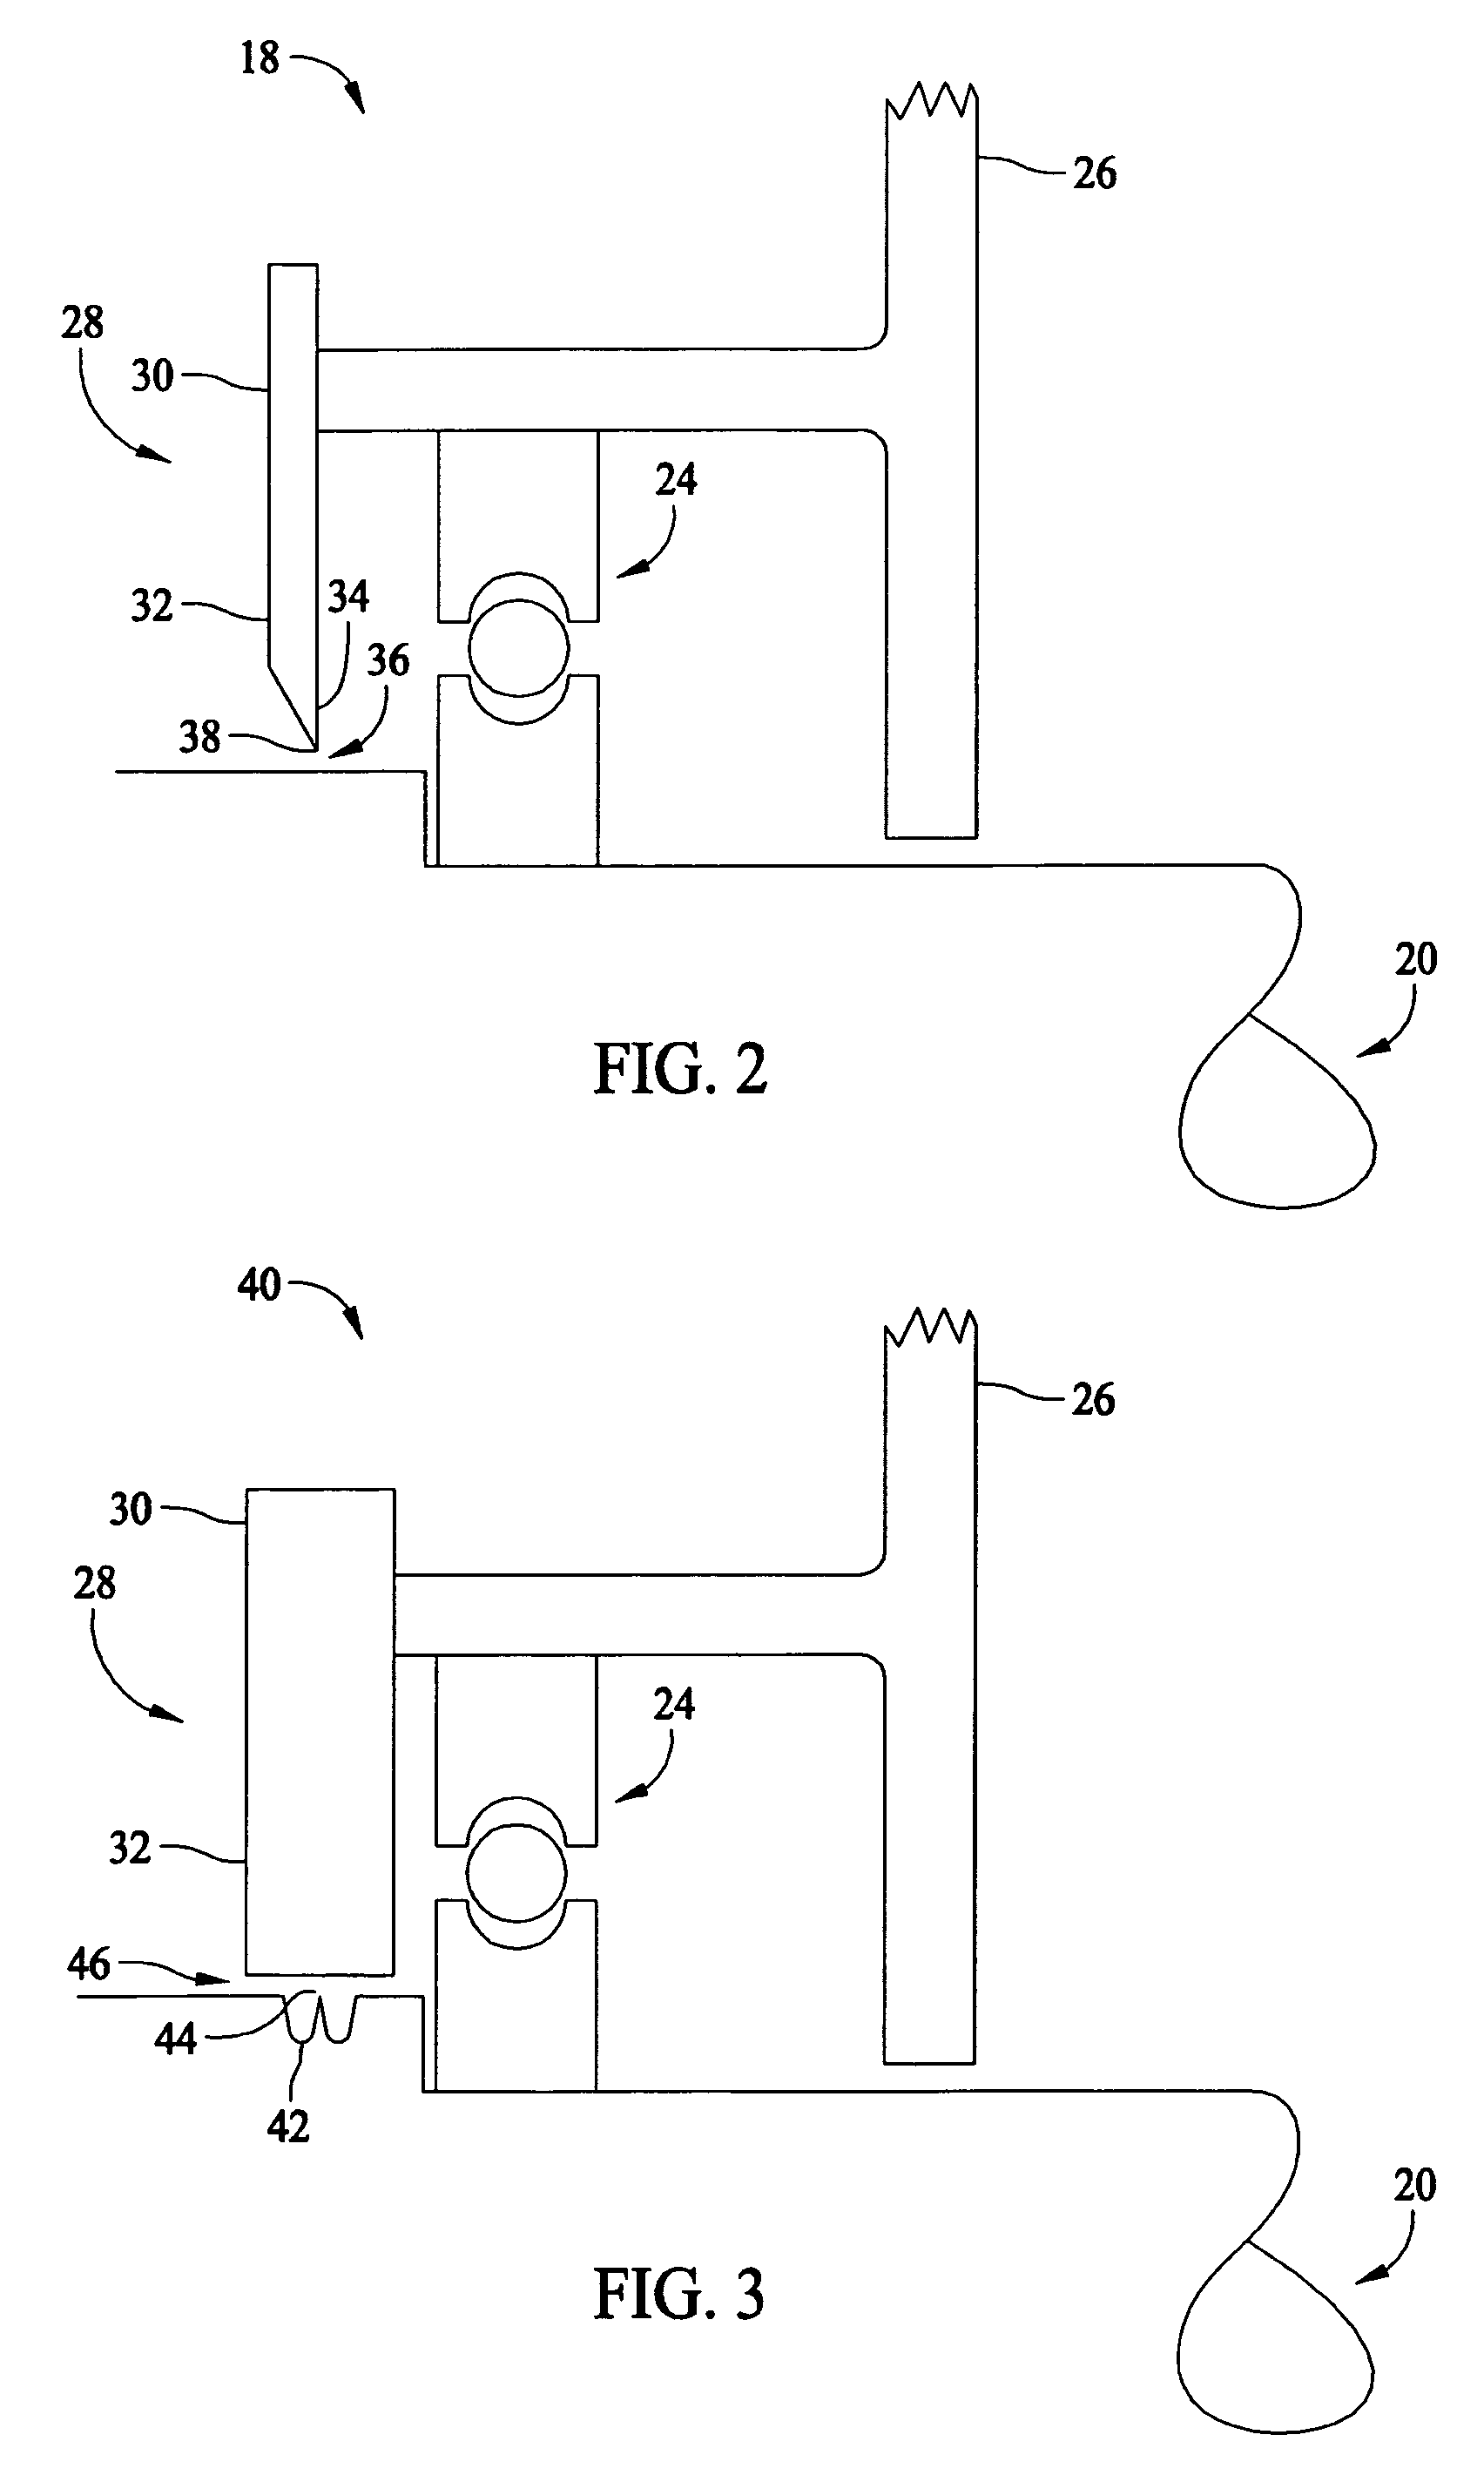 Bearing current reduction assembly